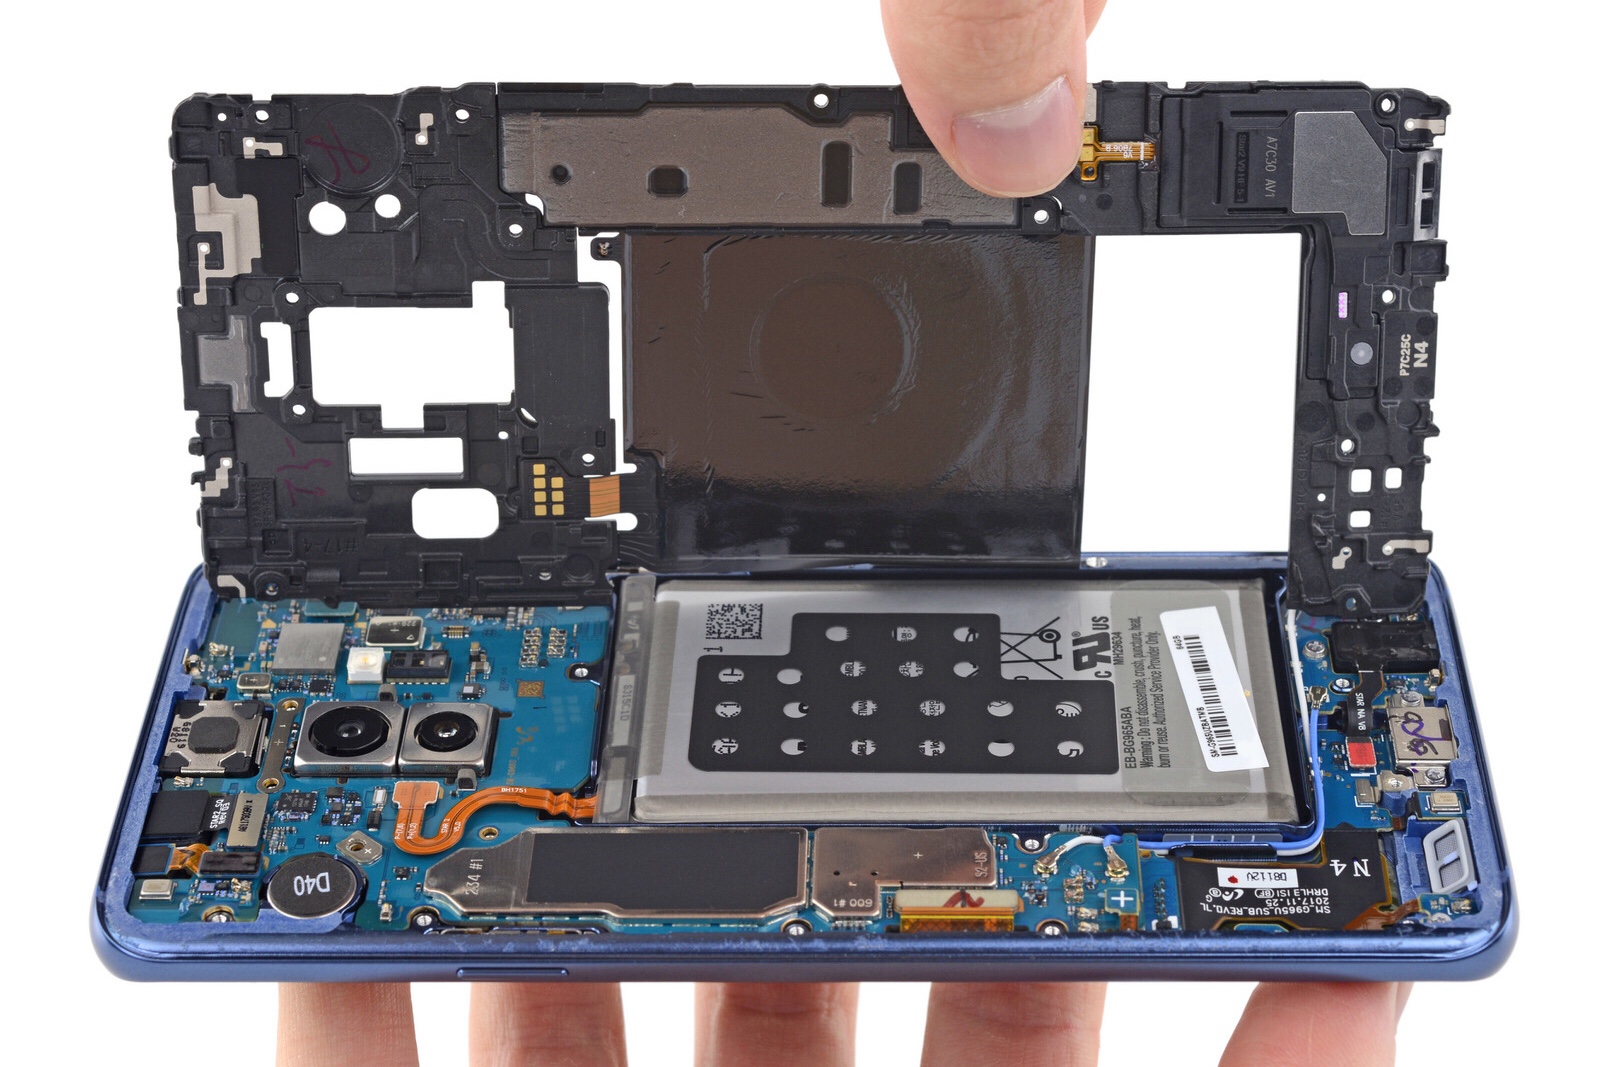 Teardown of Samsung Galaxy S9 shows us details about its camera